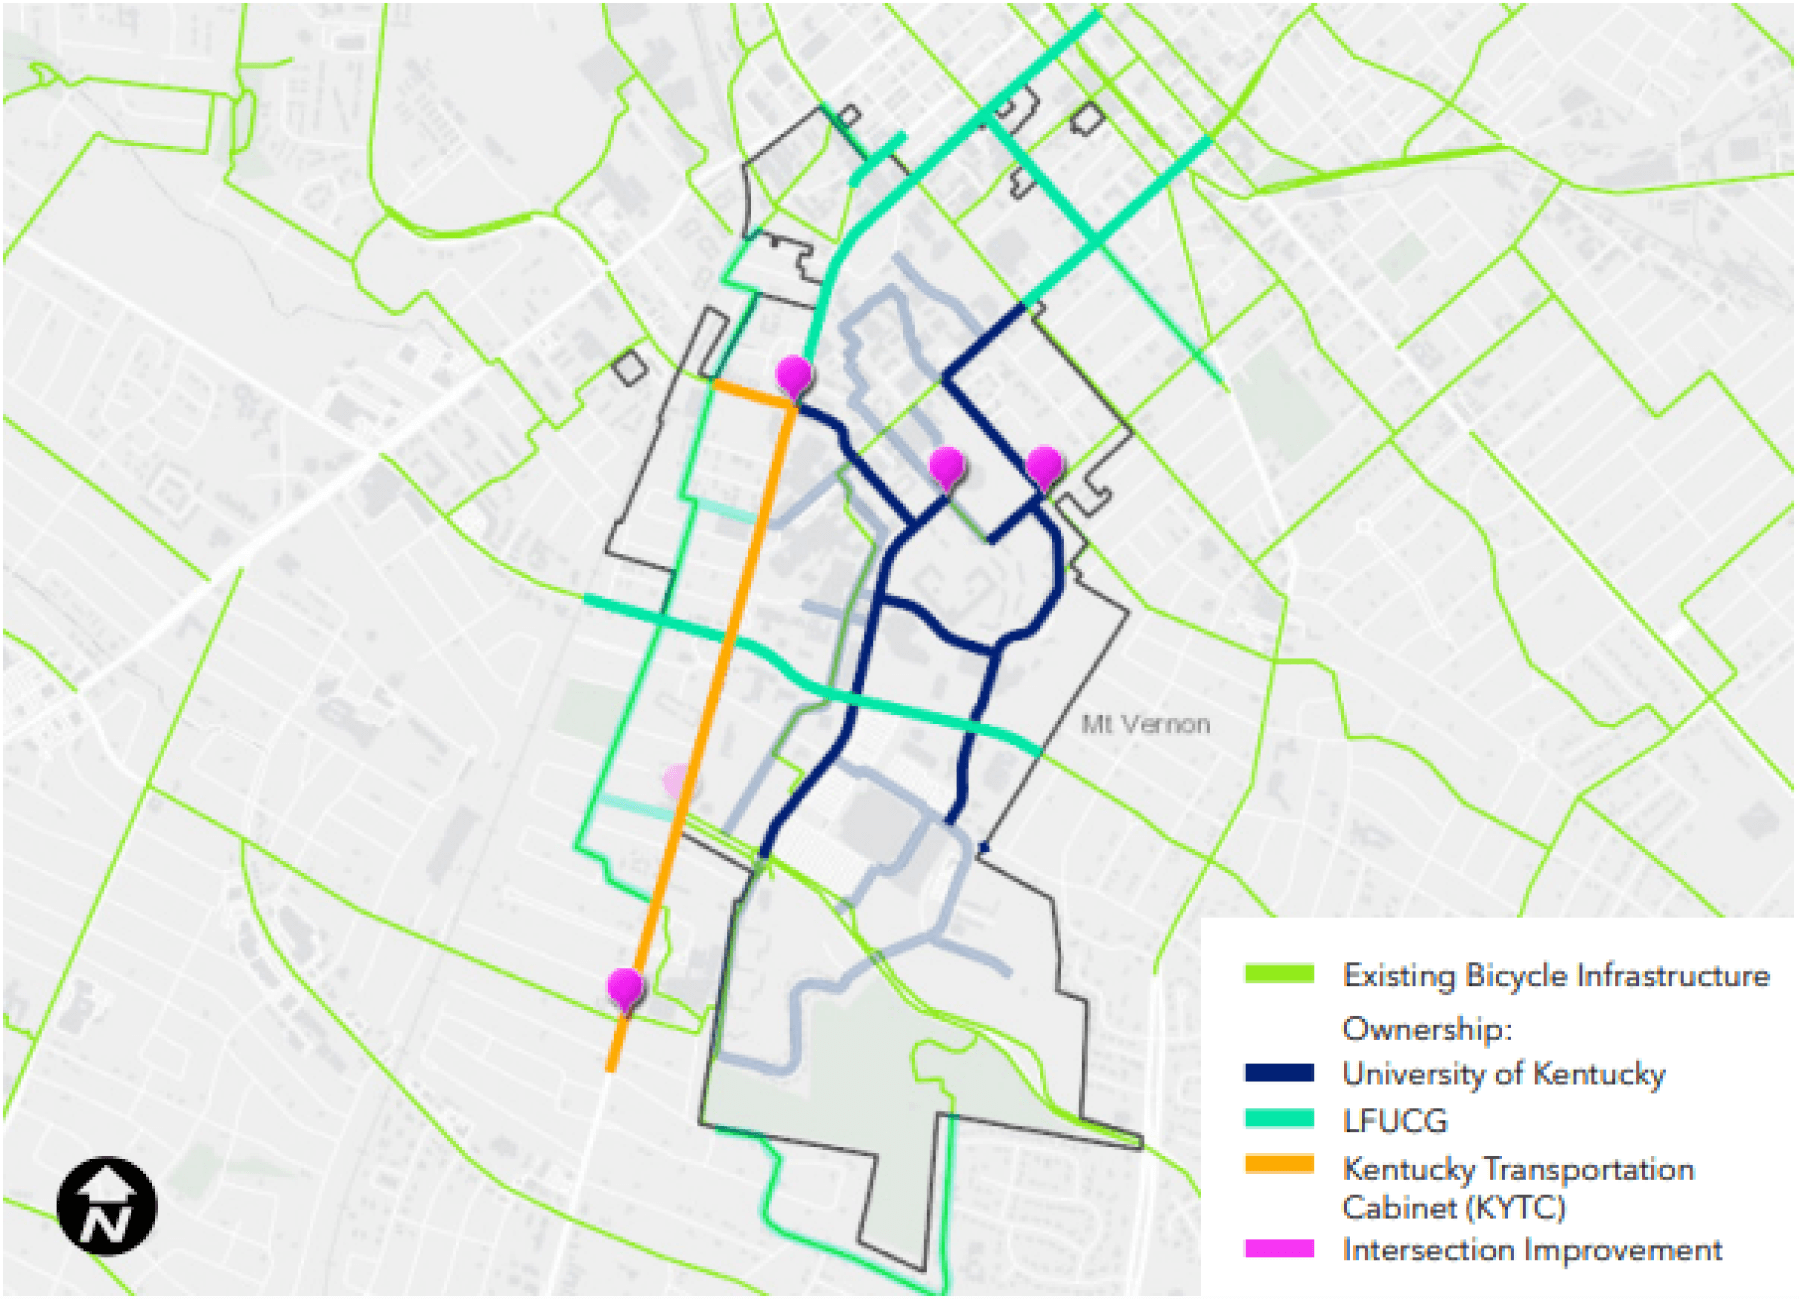 map of top 10 UK bike plan projects